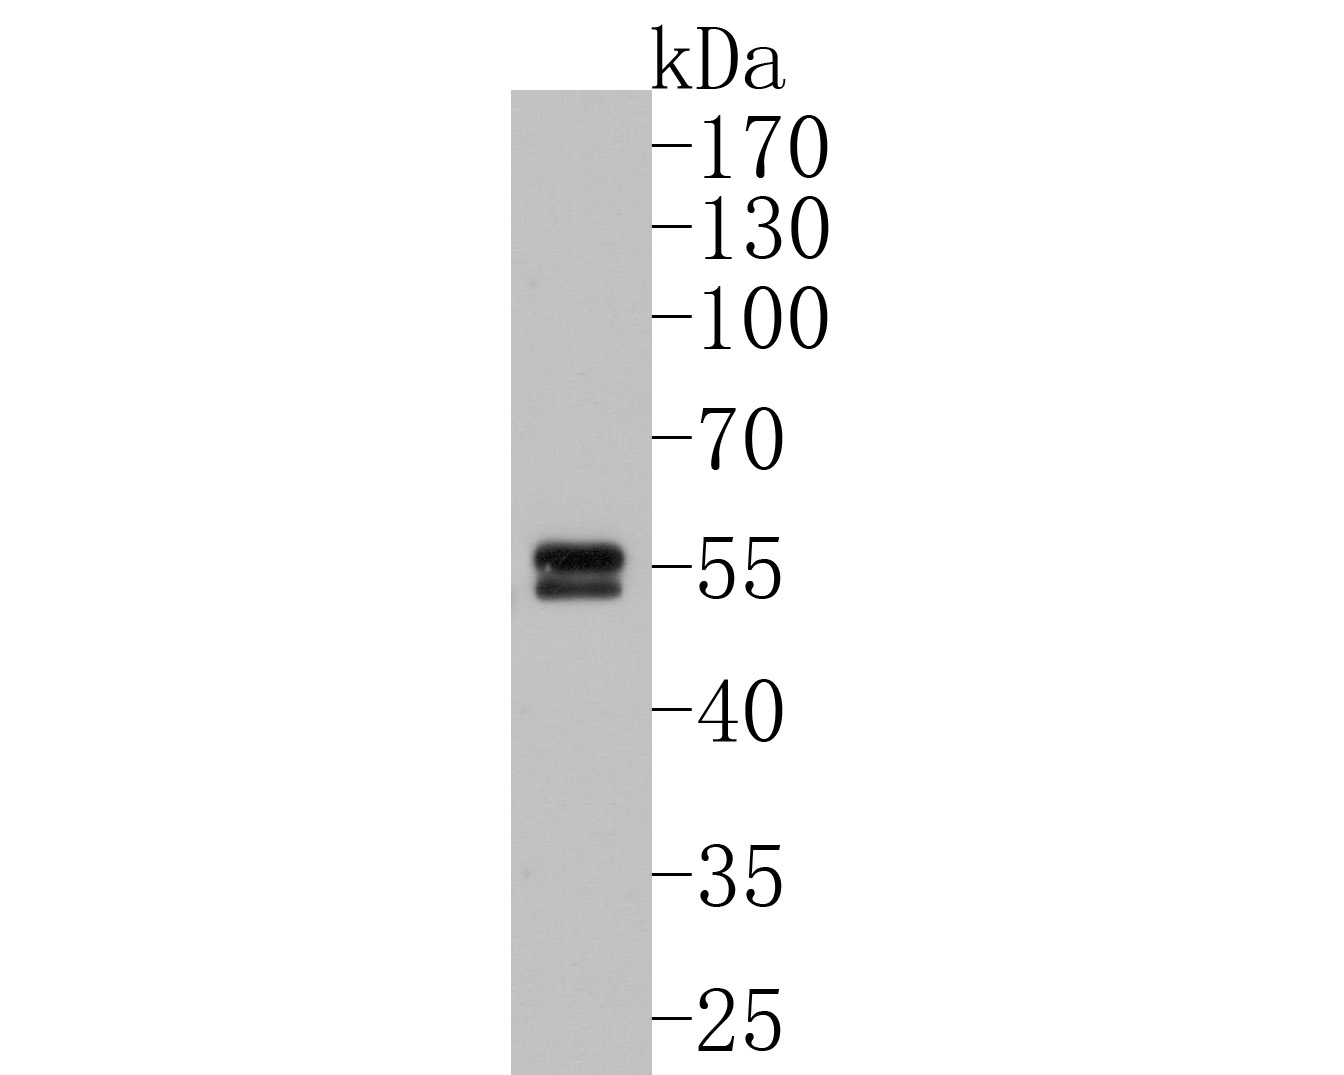 Western blot analysis of Caspase-8 on Jurkat cell lysates. Proteins were transferred to a PVDF membrane and blocked with 5% BSA in PBS for 1 hour at room temperature. The primary antibody (ET1612-70, 1/500) was used in 5% BSA at room temperature for 2 hours. Goat Anti-Rabbit IgG - HRP Secondary Antibody (HA1001) at 1:5,000 dilution was used for 1 hour at room temperature.